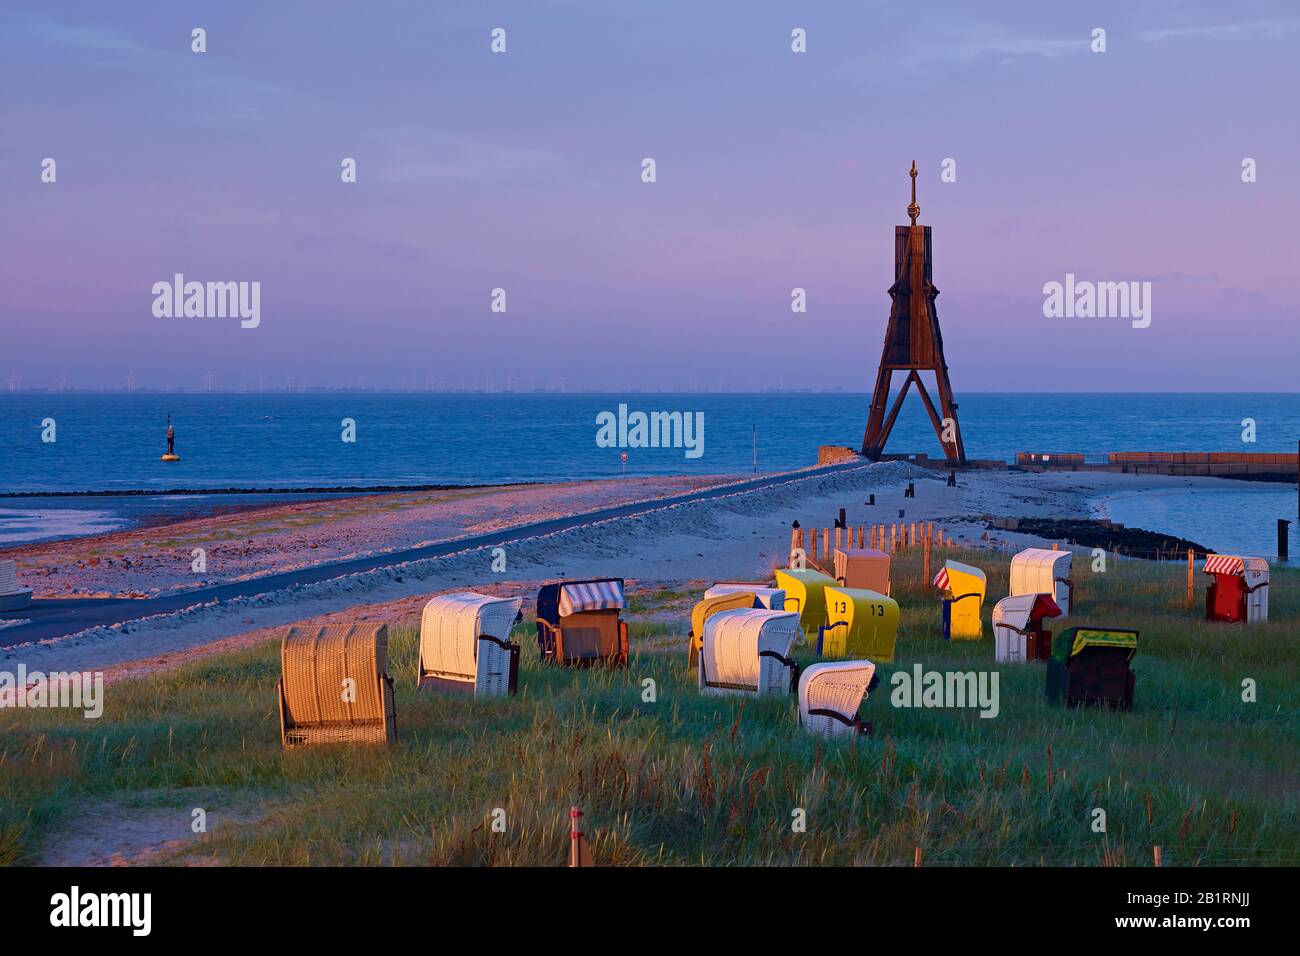 Kugelbake at the mouth of the Elbe near Cuxhaven, Lower Saxony, Germany, Stock Photo